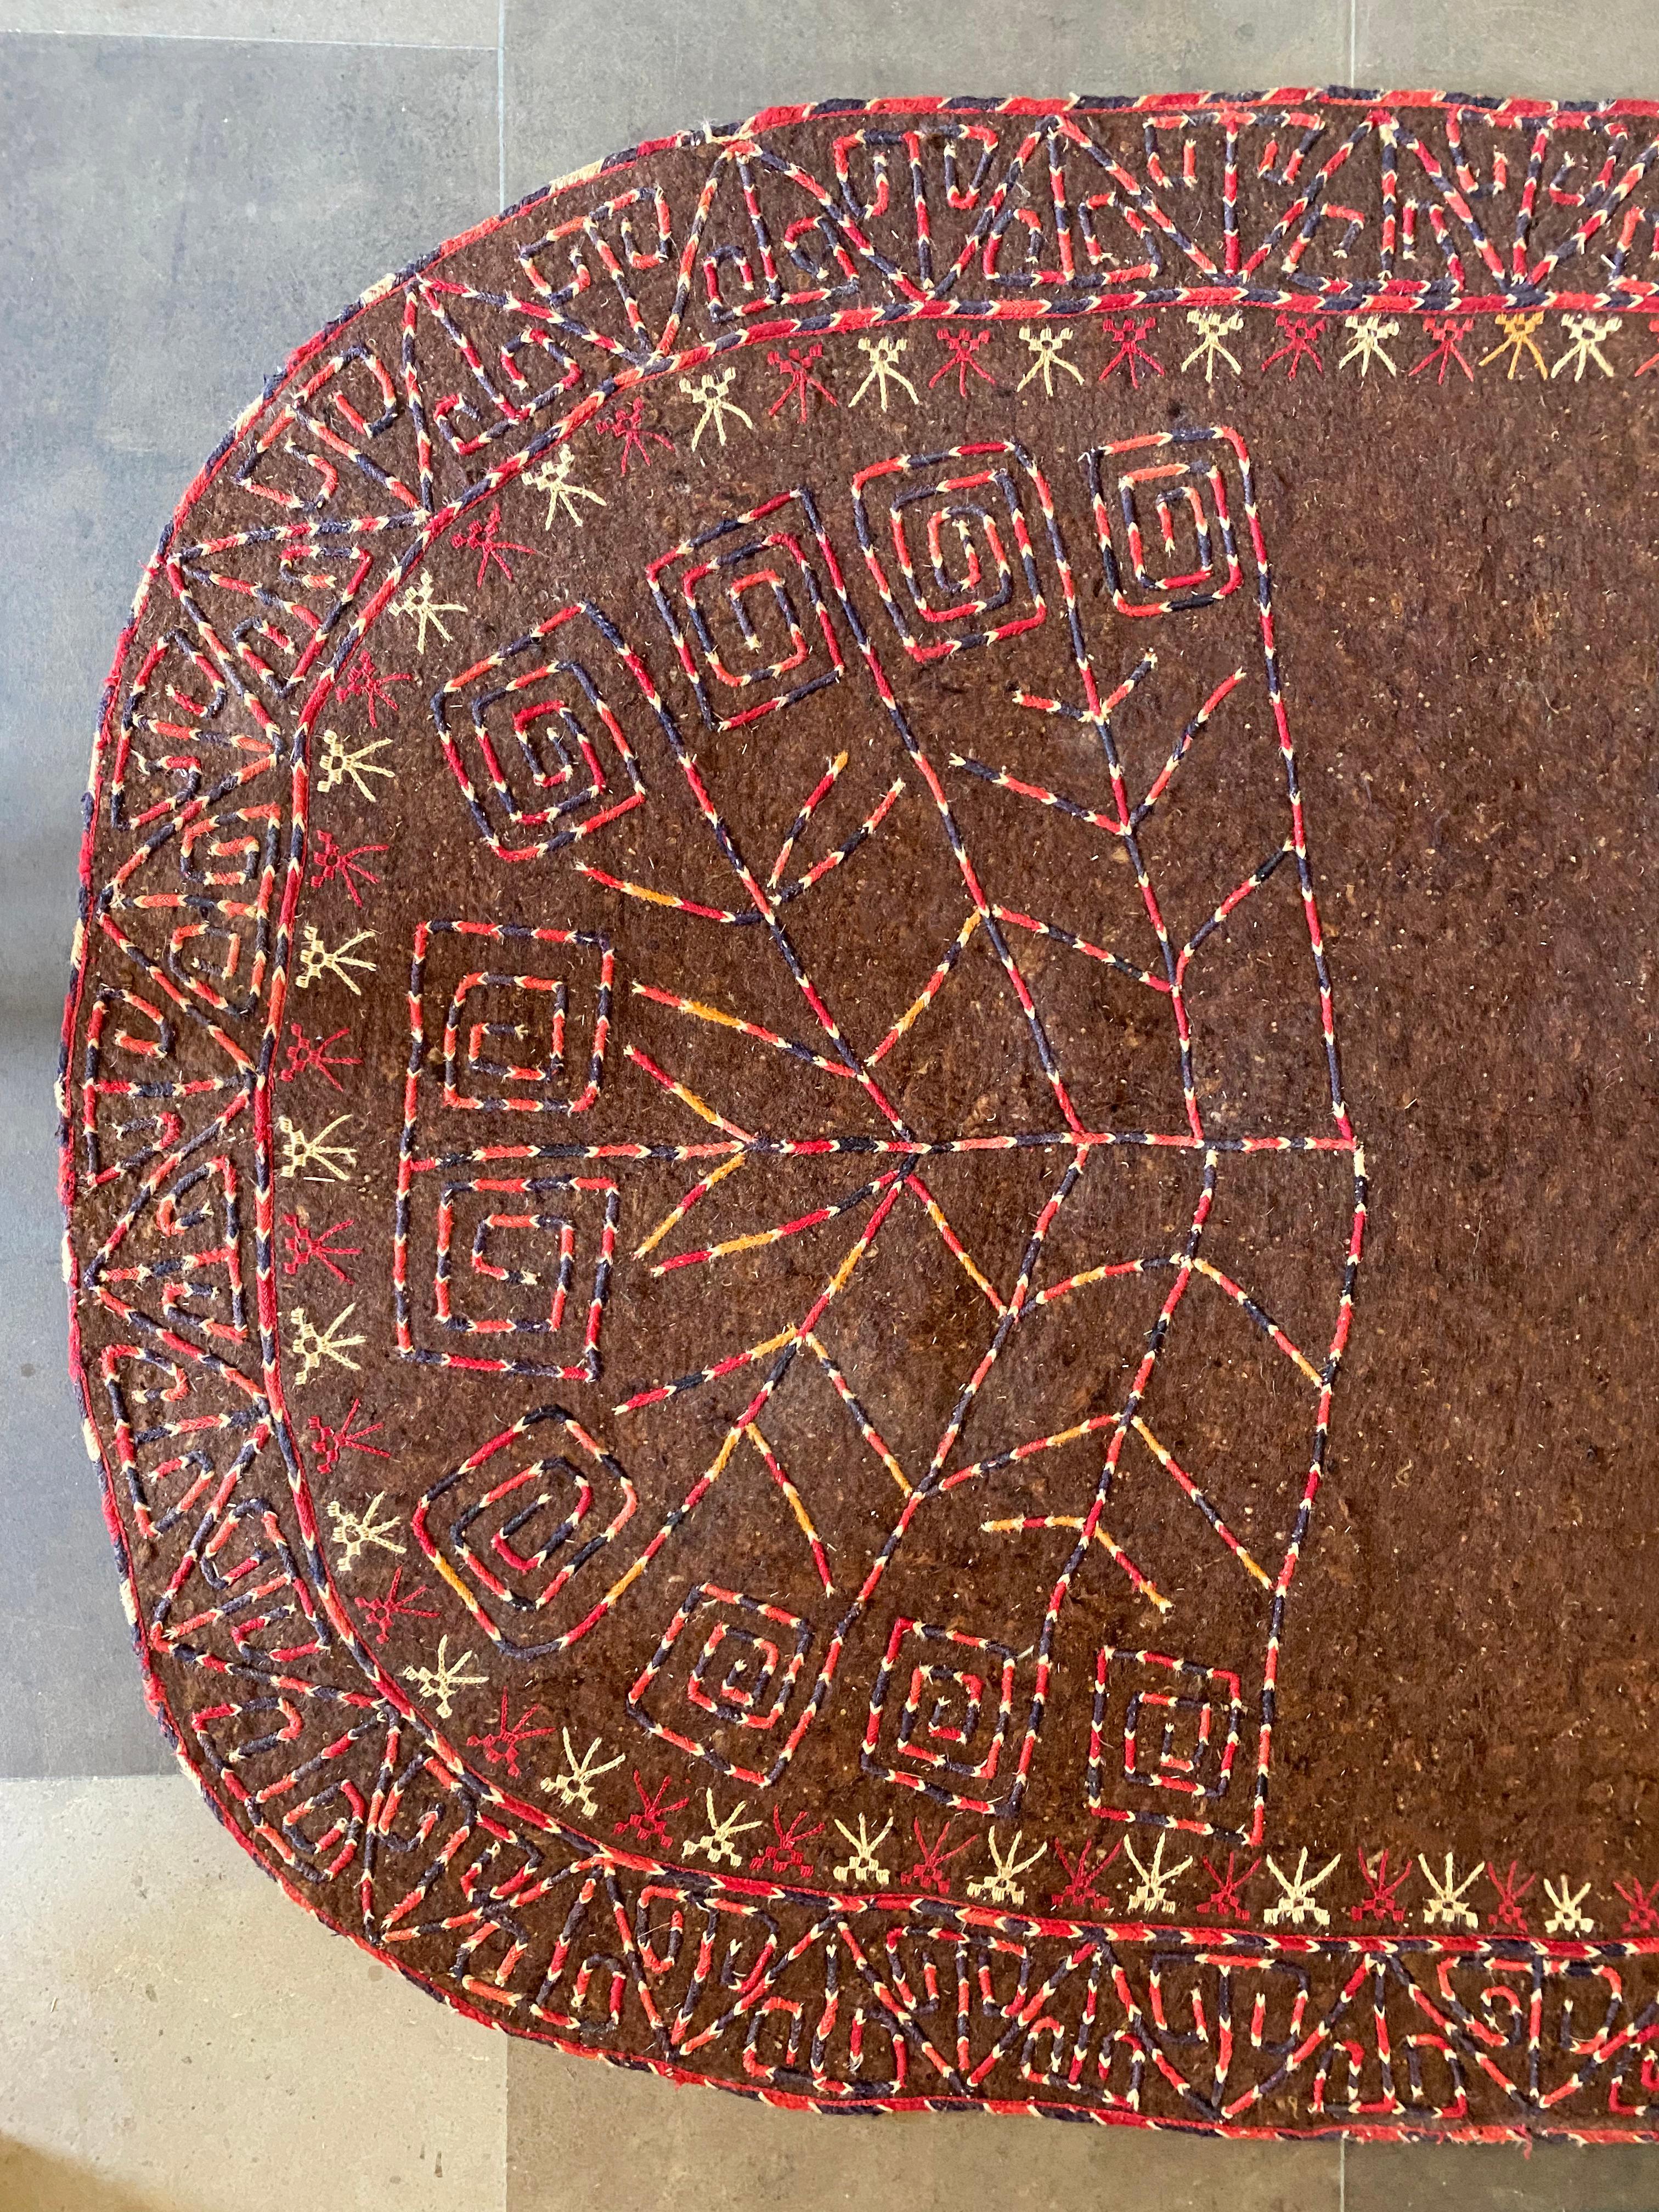 This Turkmenistan Yomud tribe ceremonial horse blanket is crafted from brown felt wool and dates to the early 20th Century. It features a mix embroidered tribal patterns and motifs as well as side flaps. This blanket would have been used exclusively